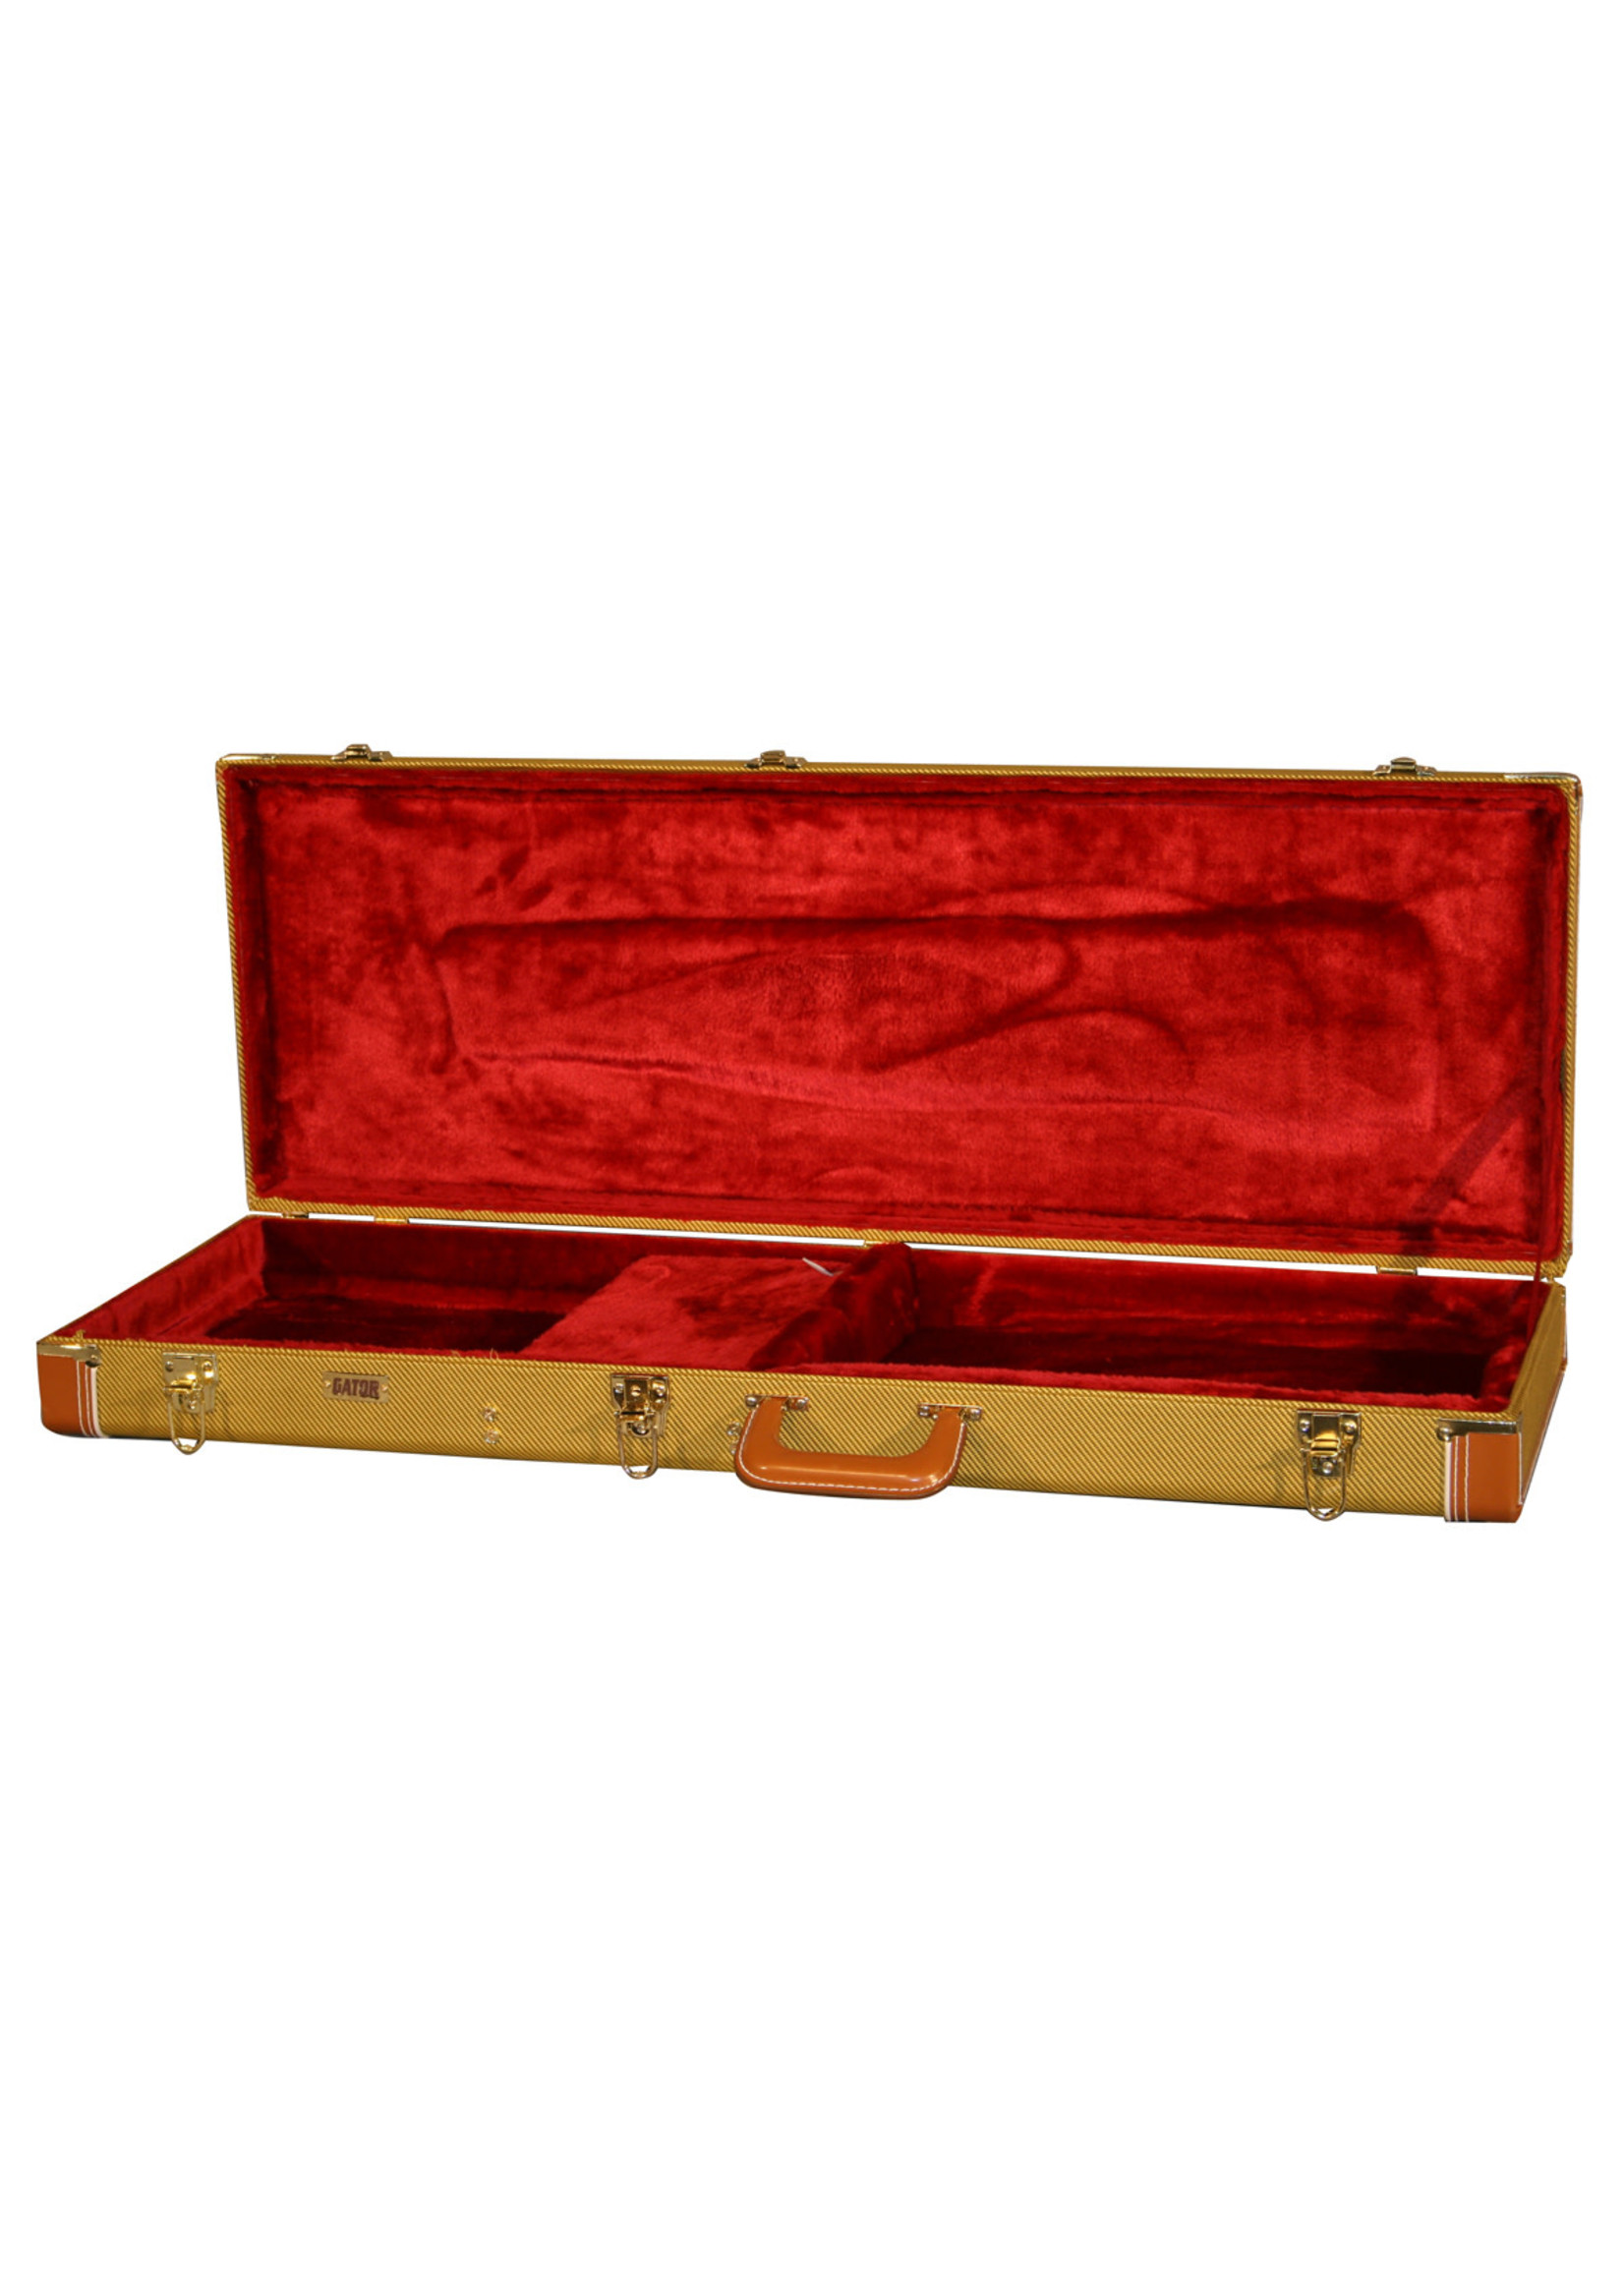 Gator Gator Deluxe Wood Case for Electric Guitars, Tweed